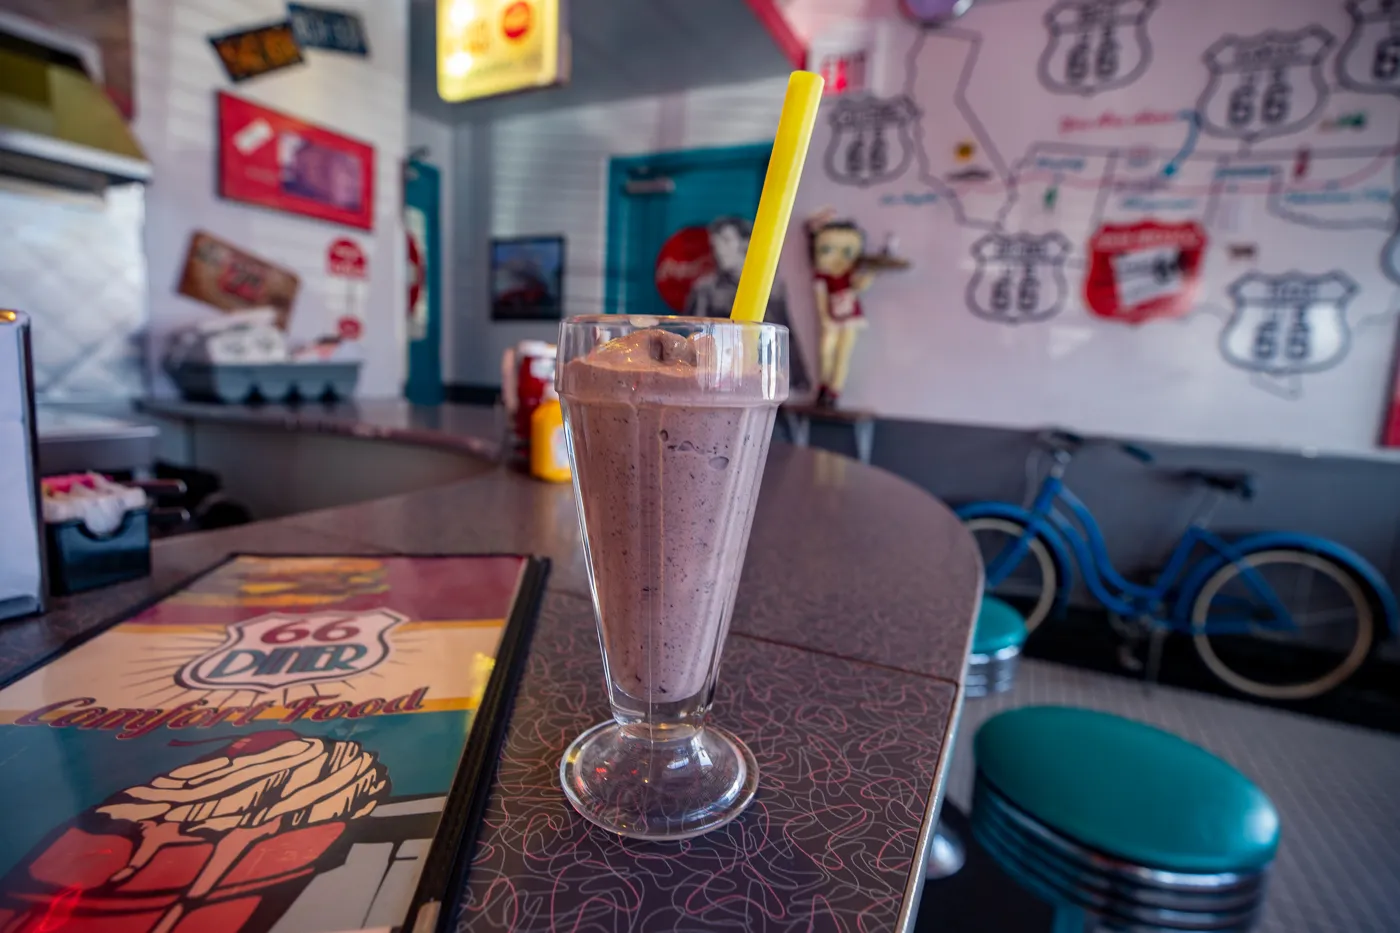 Pink Cadillac milkshake - strawberry milkshake with Oreos at 66 Diner in Albuquerque, New Mexico Route 66 restaurant and roadside attraction